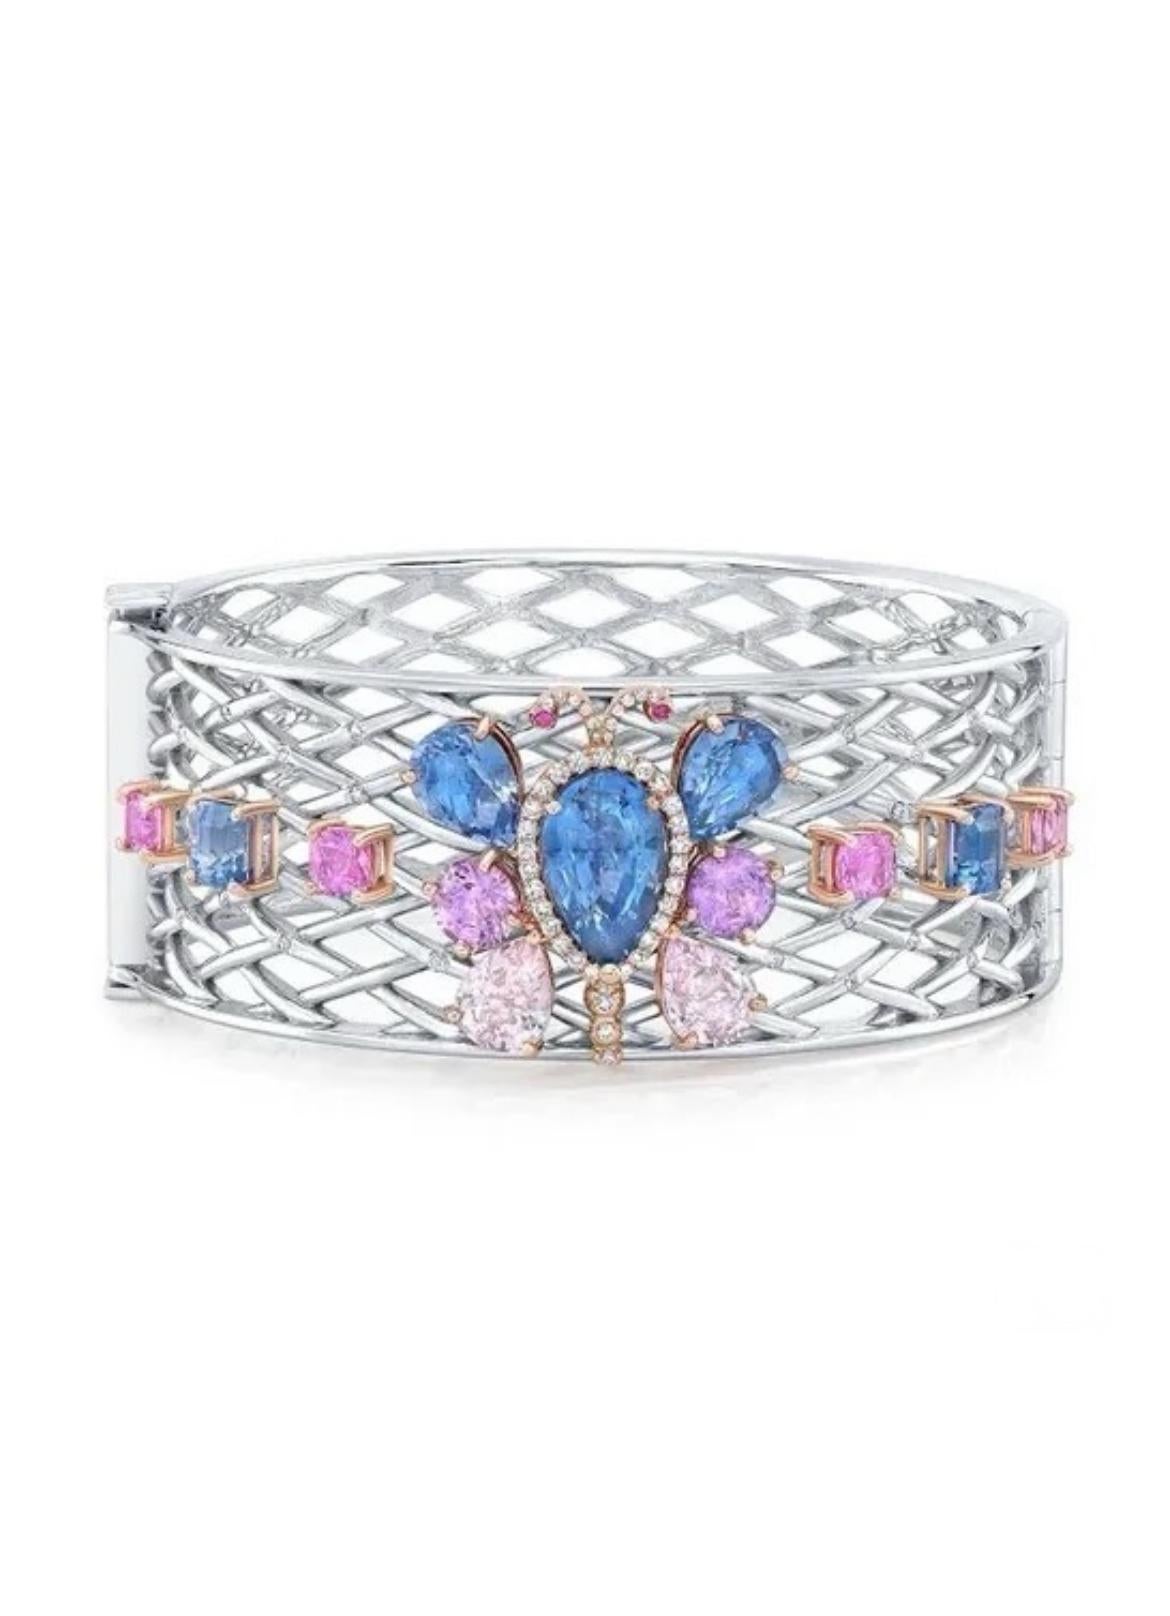 20.17 carats of Ceylon Sapphires are celebrated in this beauteous 18K white with rose gold bracelet. 

The sapphires are accented by white icy diamonds totaling 0.41 carats.

The center pear-shaped blue sapphire weighs 4.45-carat, and is certified